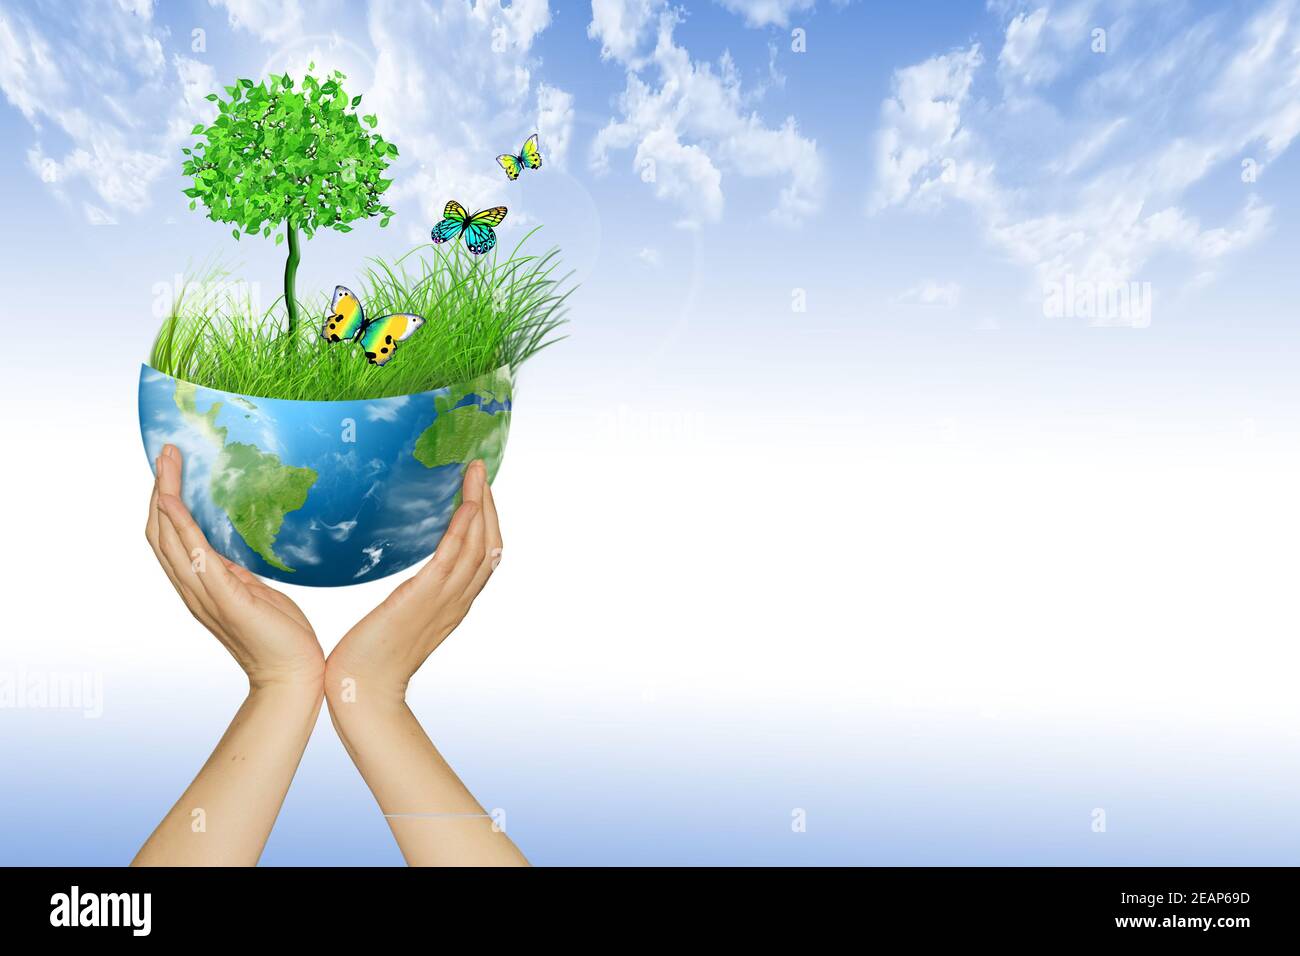 Environmental Concept. Globe in the hands. Tree, grass and butte Stock Photo